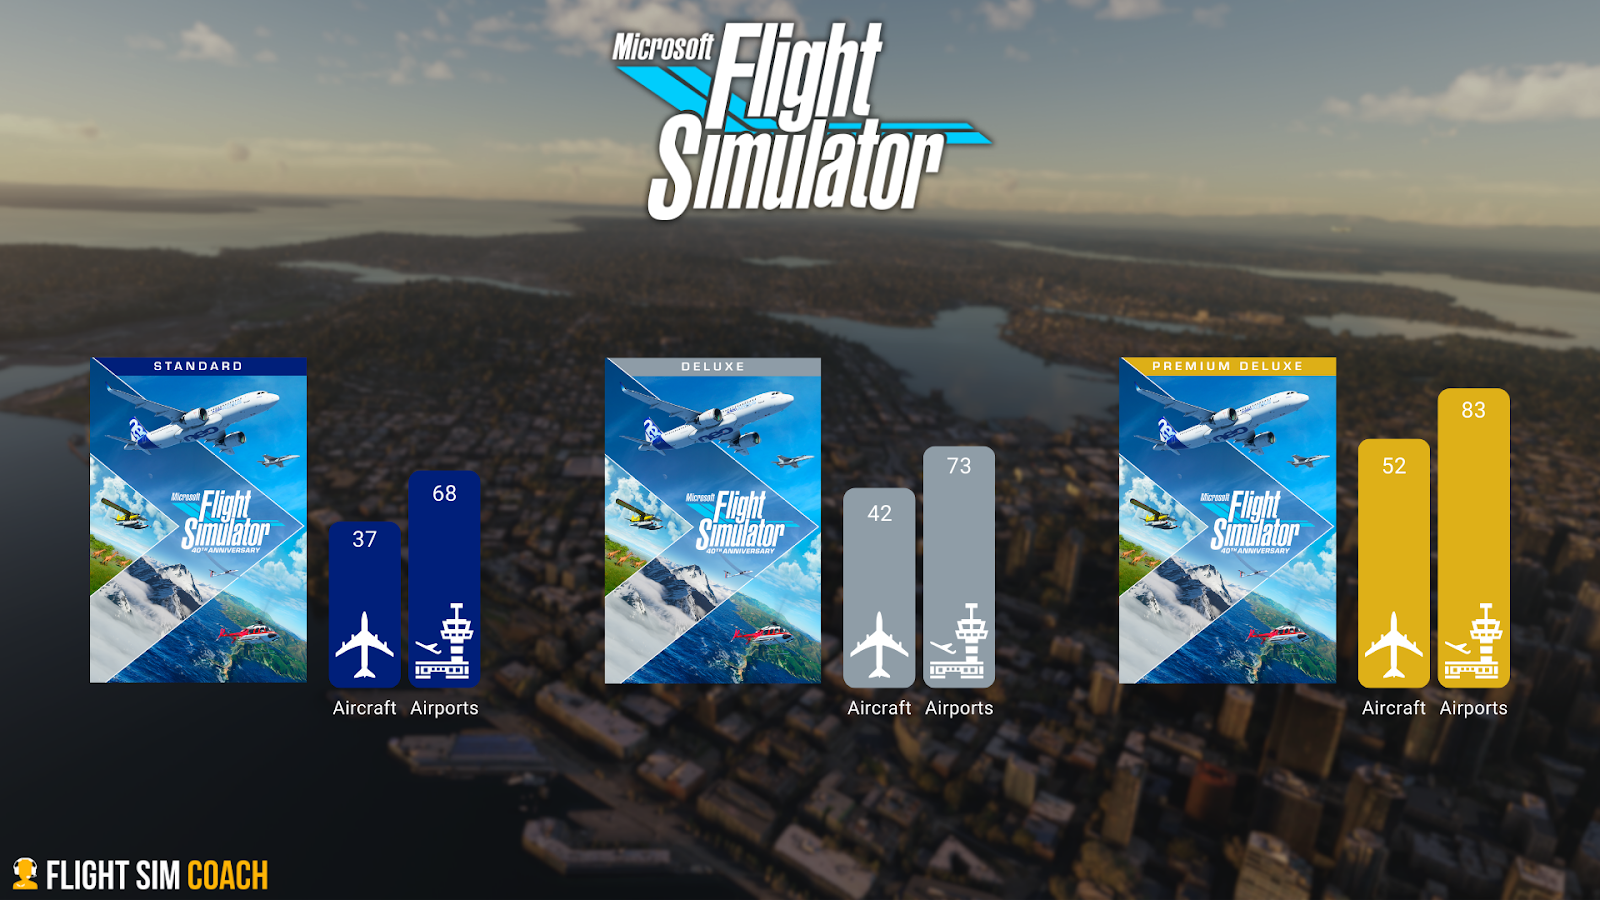 An infographic of the number of airports and aircraft included in each version of Microsoft Flight Simulator.